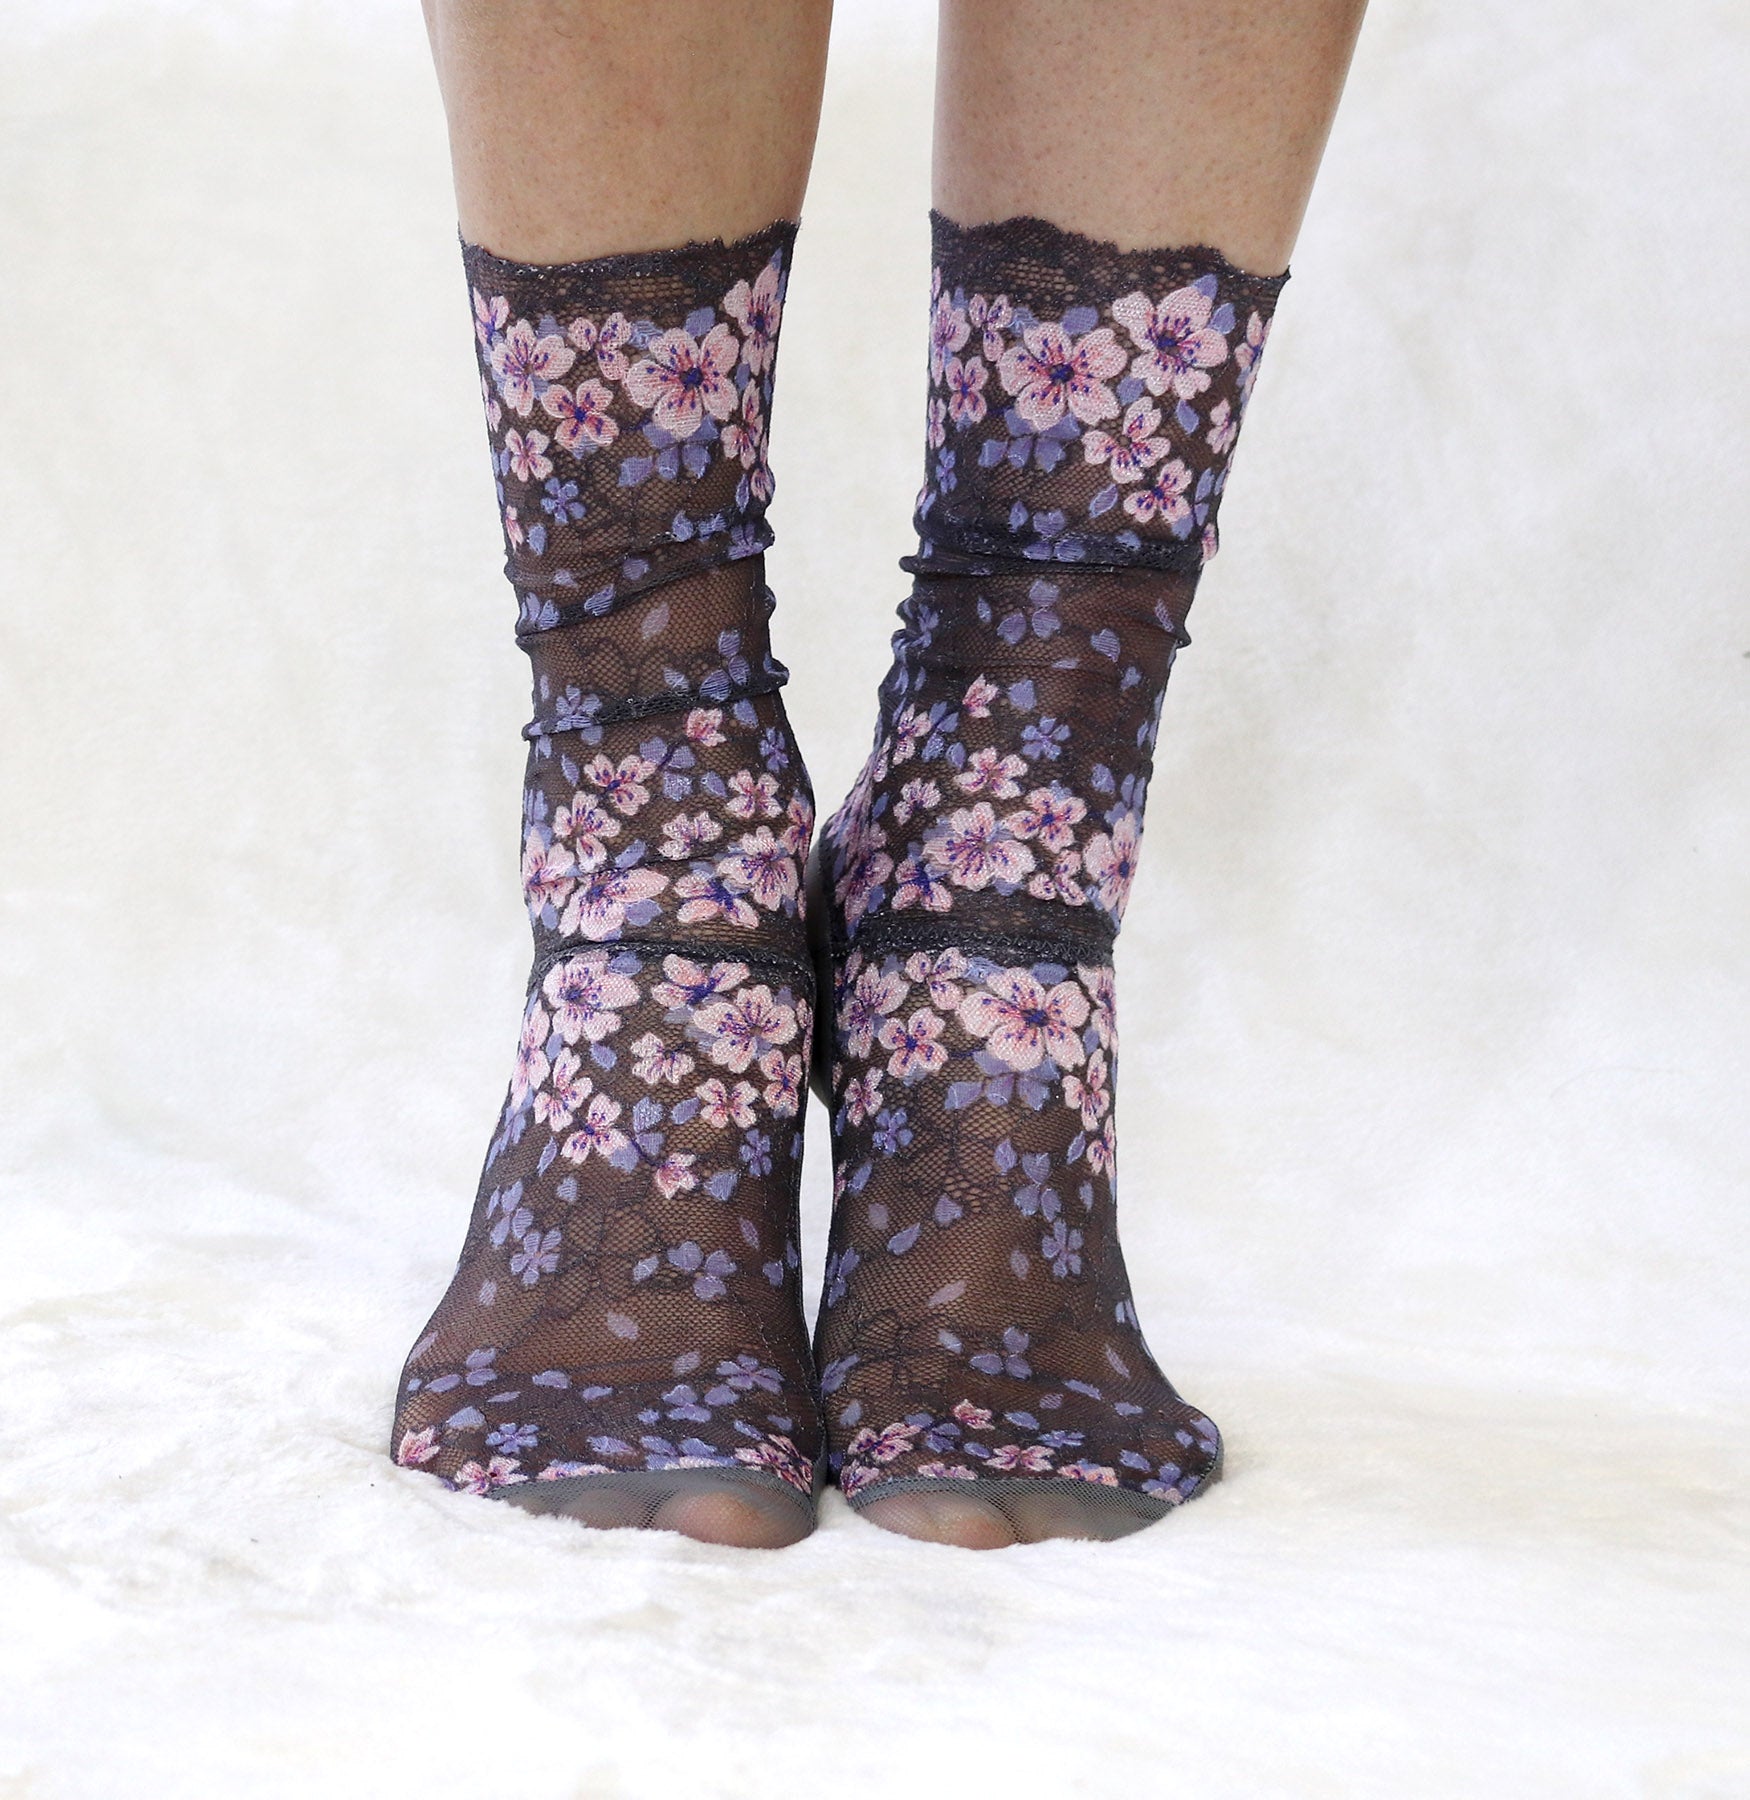 Embroidered Lace Women's Socks. Smoky Gray Floral – Tatiana's Threads